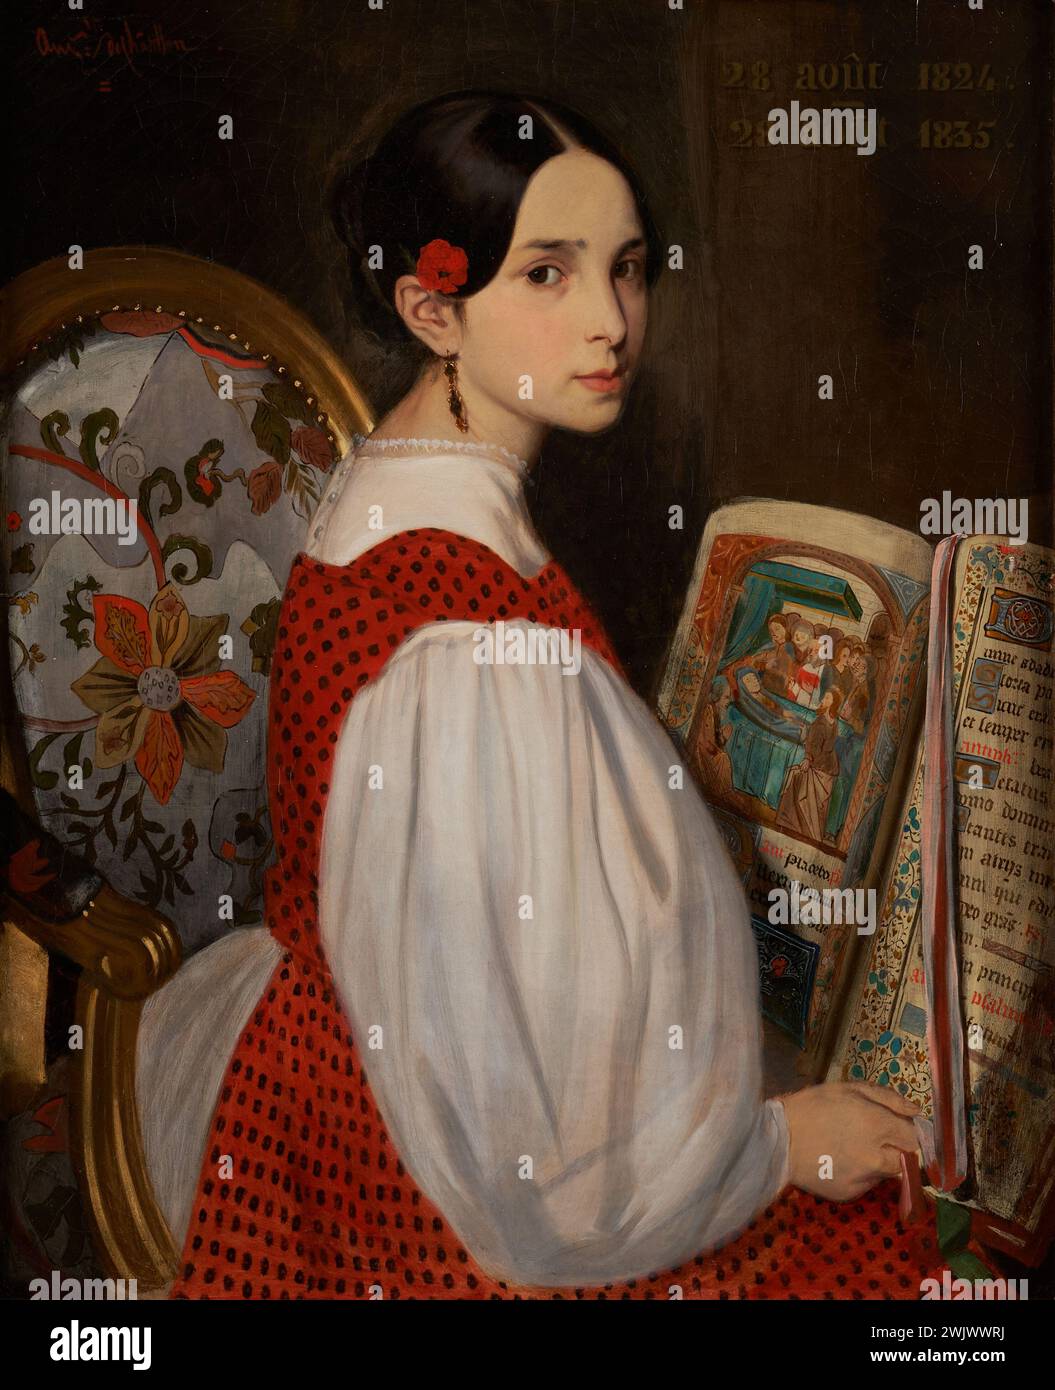 Châtillon, Auguste de (n.1813 - D.1881), leopoldine in the book of hours (dummy title), 1835. Oil on canvas. Houses of Victor Hugo Paris - Guernsey. Stock Photo